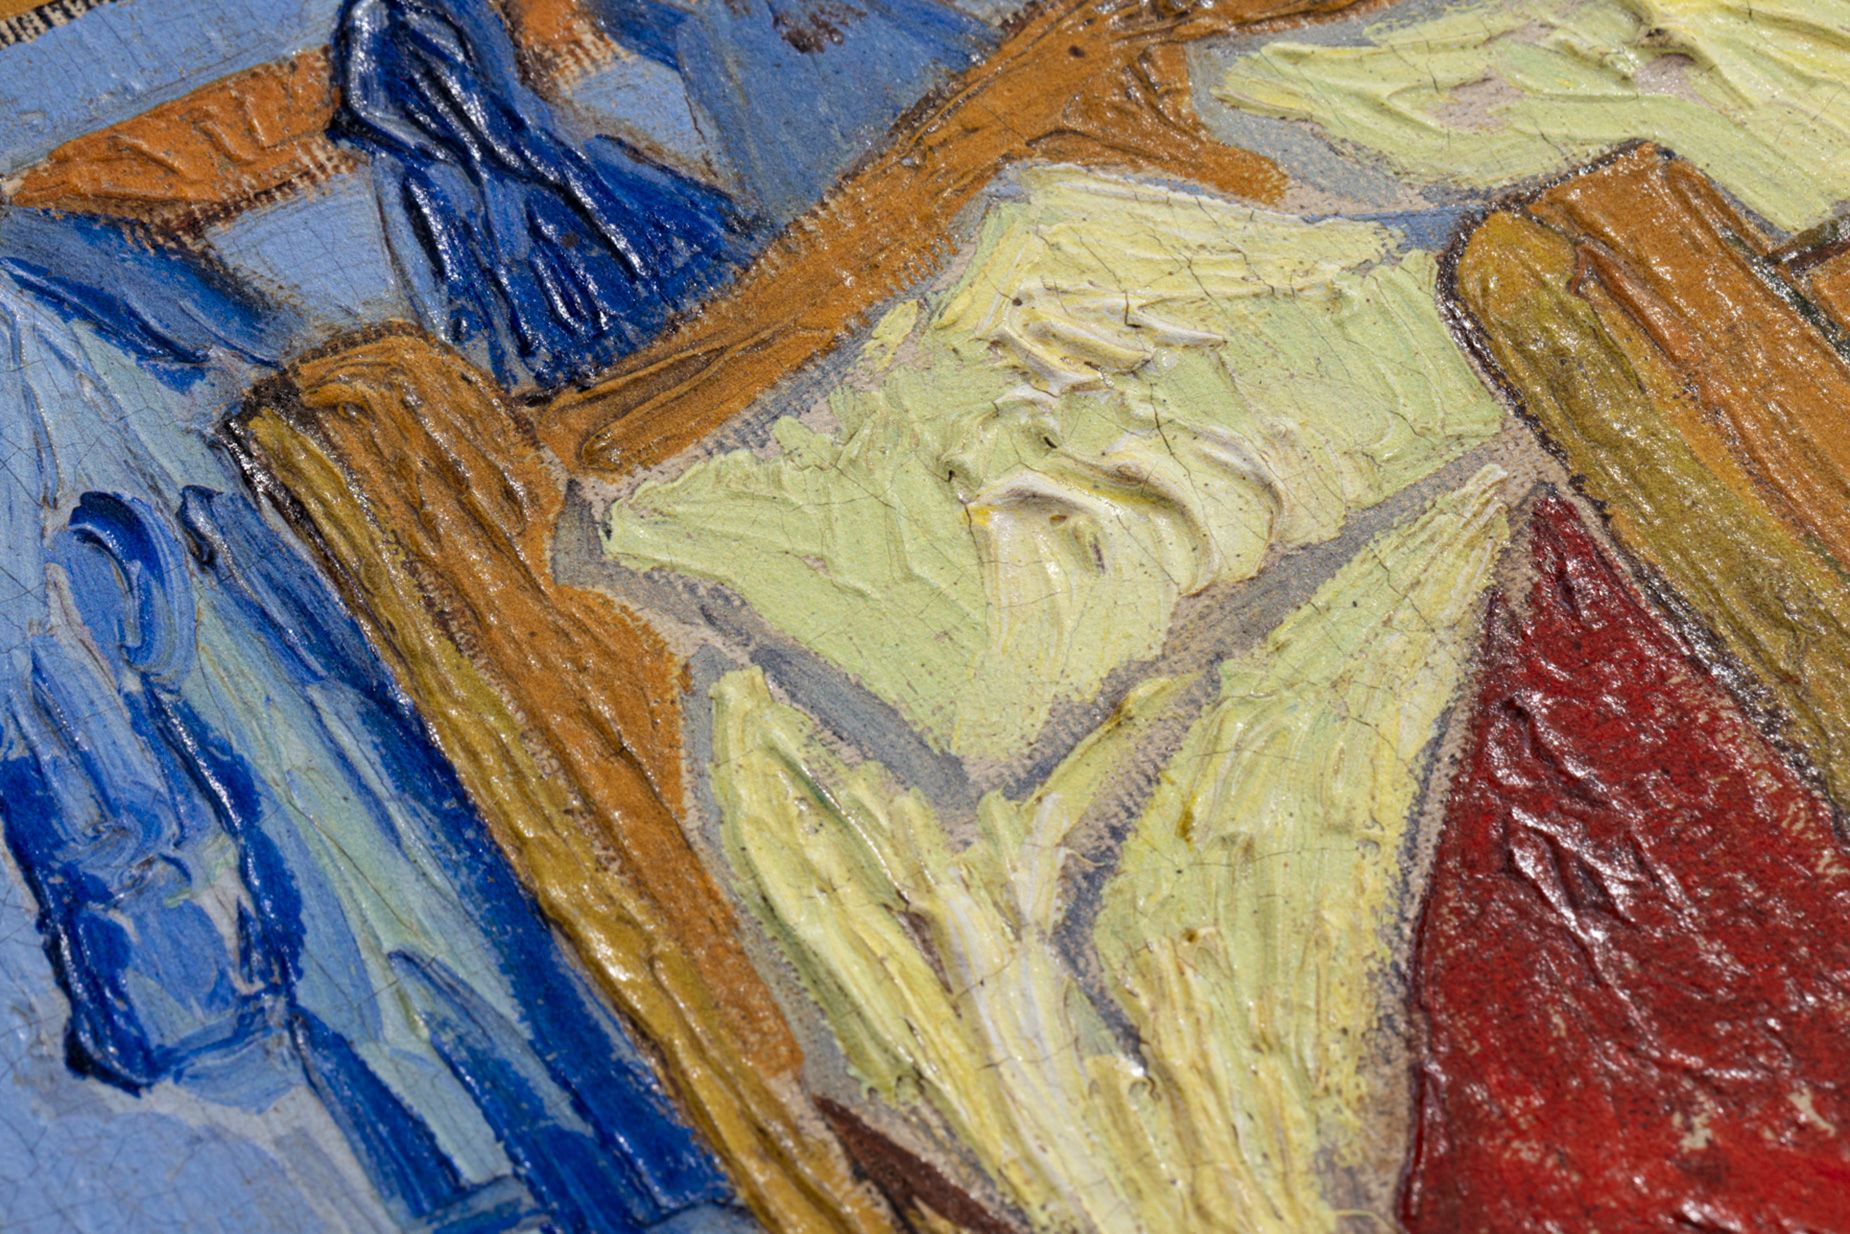 A close-up shot shows the textured surface of Lito Masters' reproduction of Vincent van Gogh's "Bedroom in Arles."